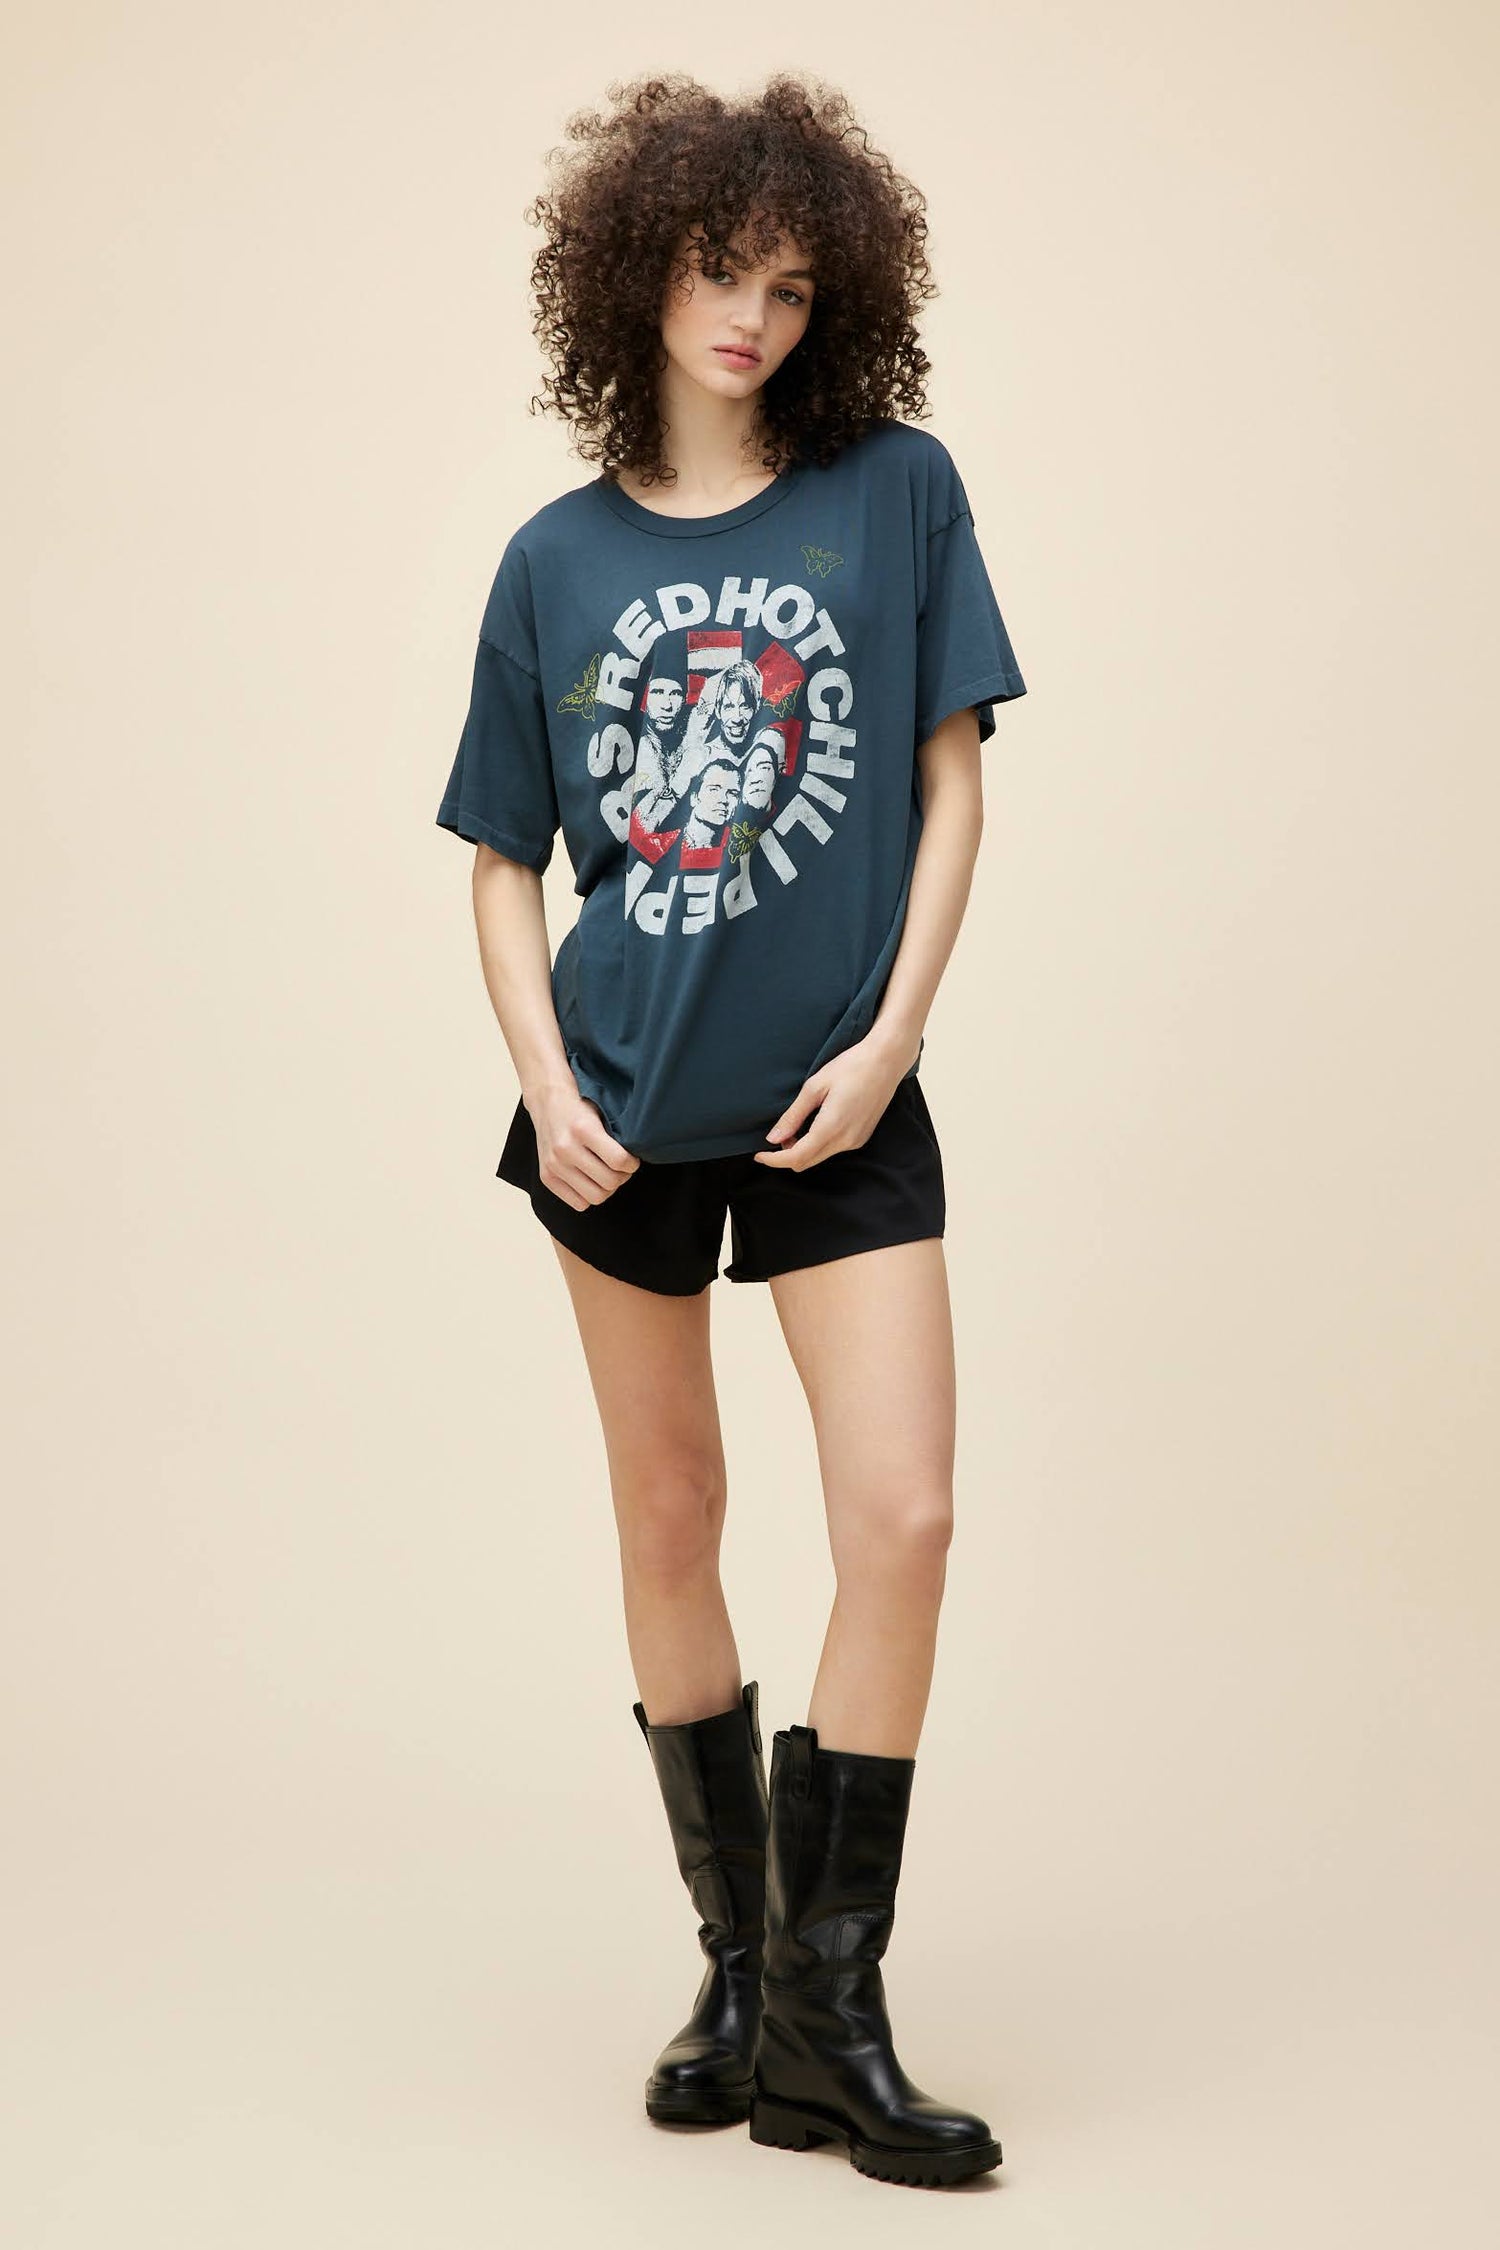 Curly-haired model wearing an oversized Red Hot Chili Peppers graphic tee.